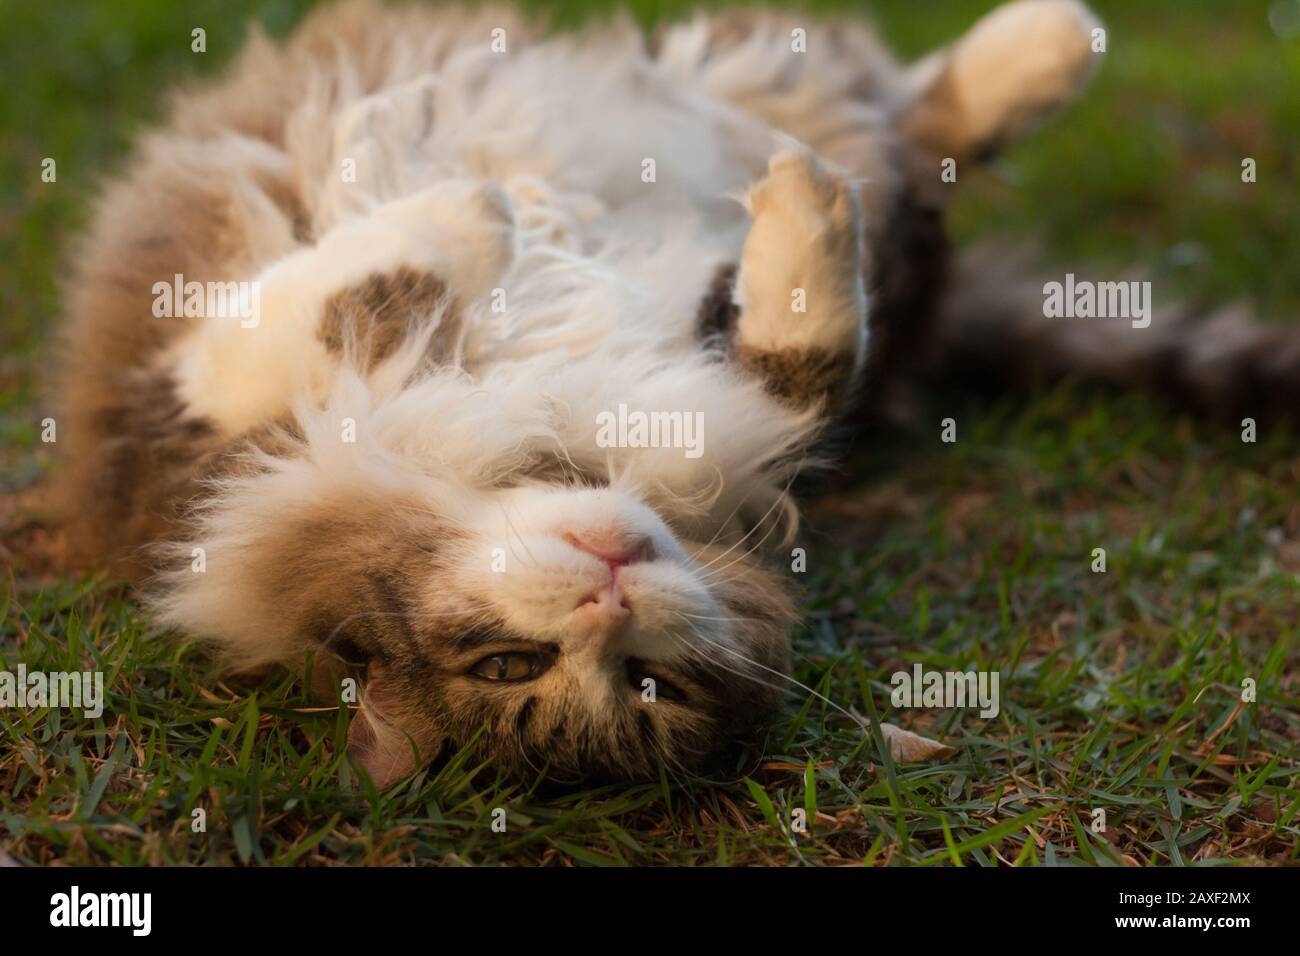 Close-up of a playful cat on the grass outdoors Stock Photo